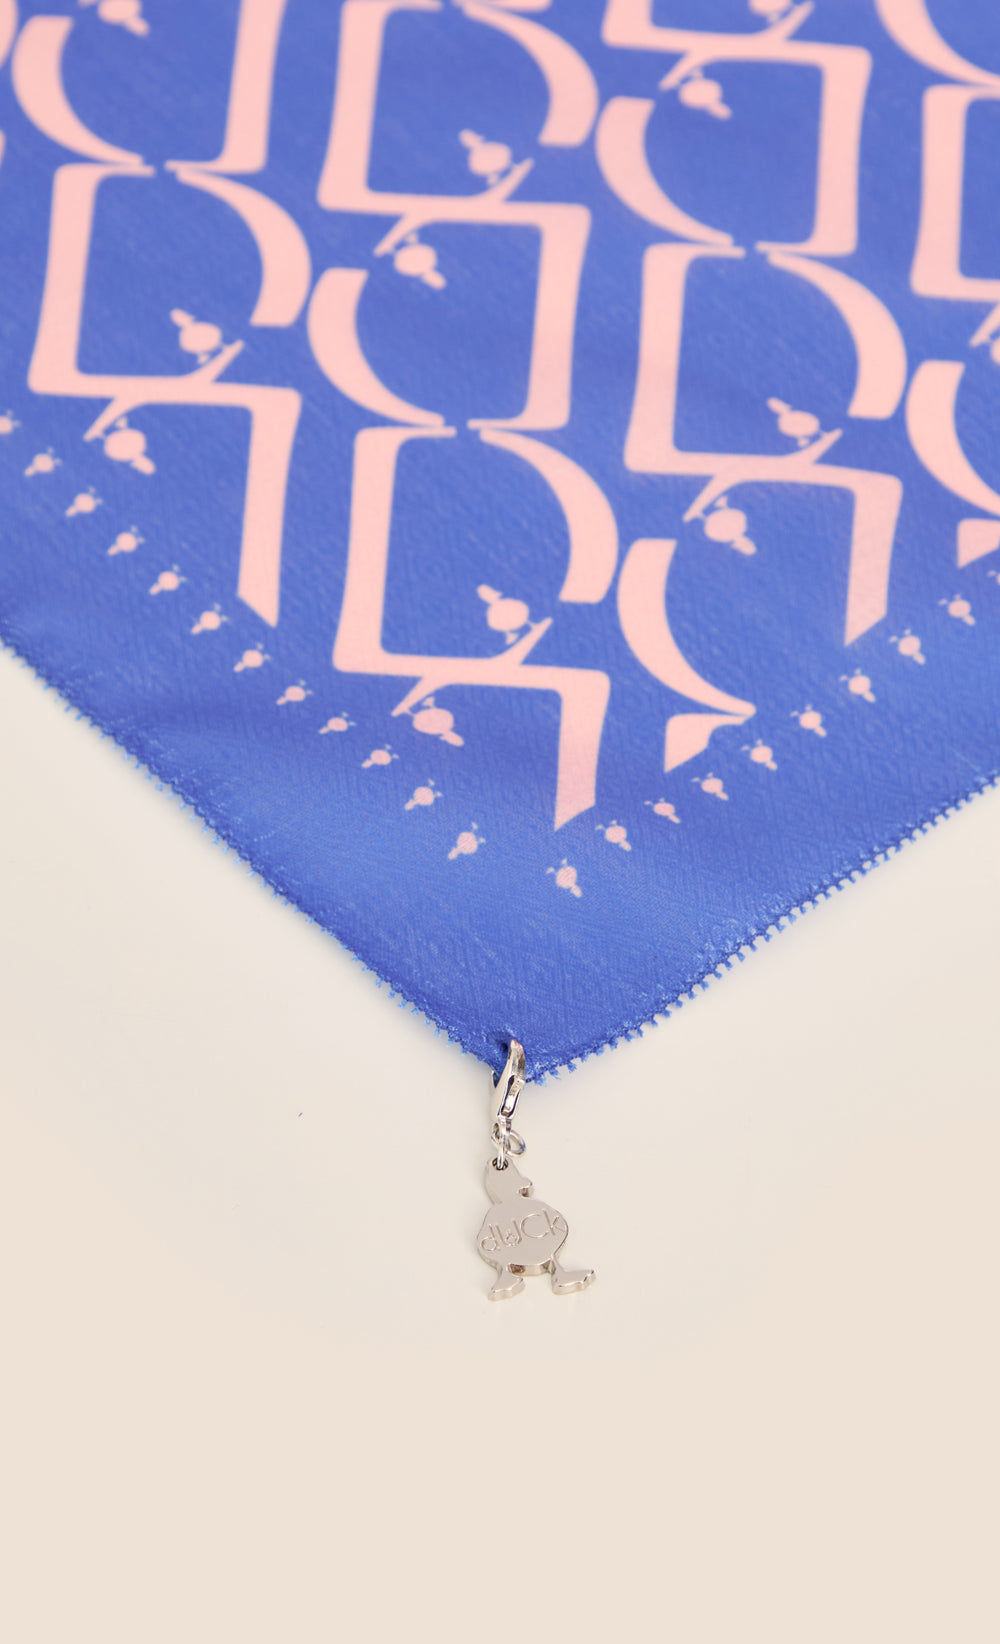 D Monogram dUCk Voile Square Scarf in Butterfly Pea